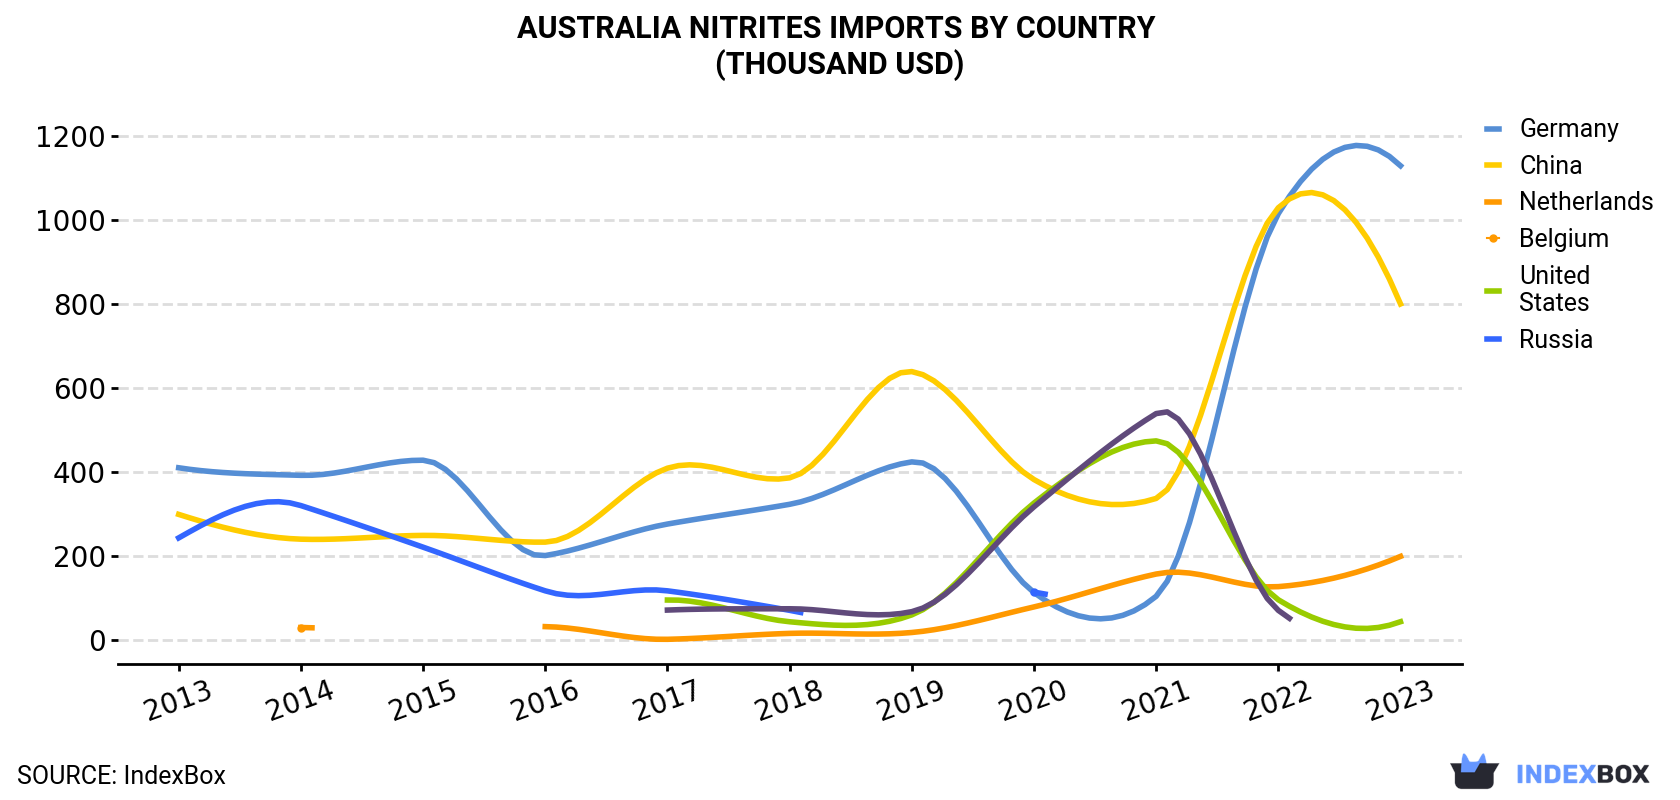 Australia Nitrites Imports By Country (Thousand USD)